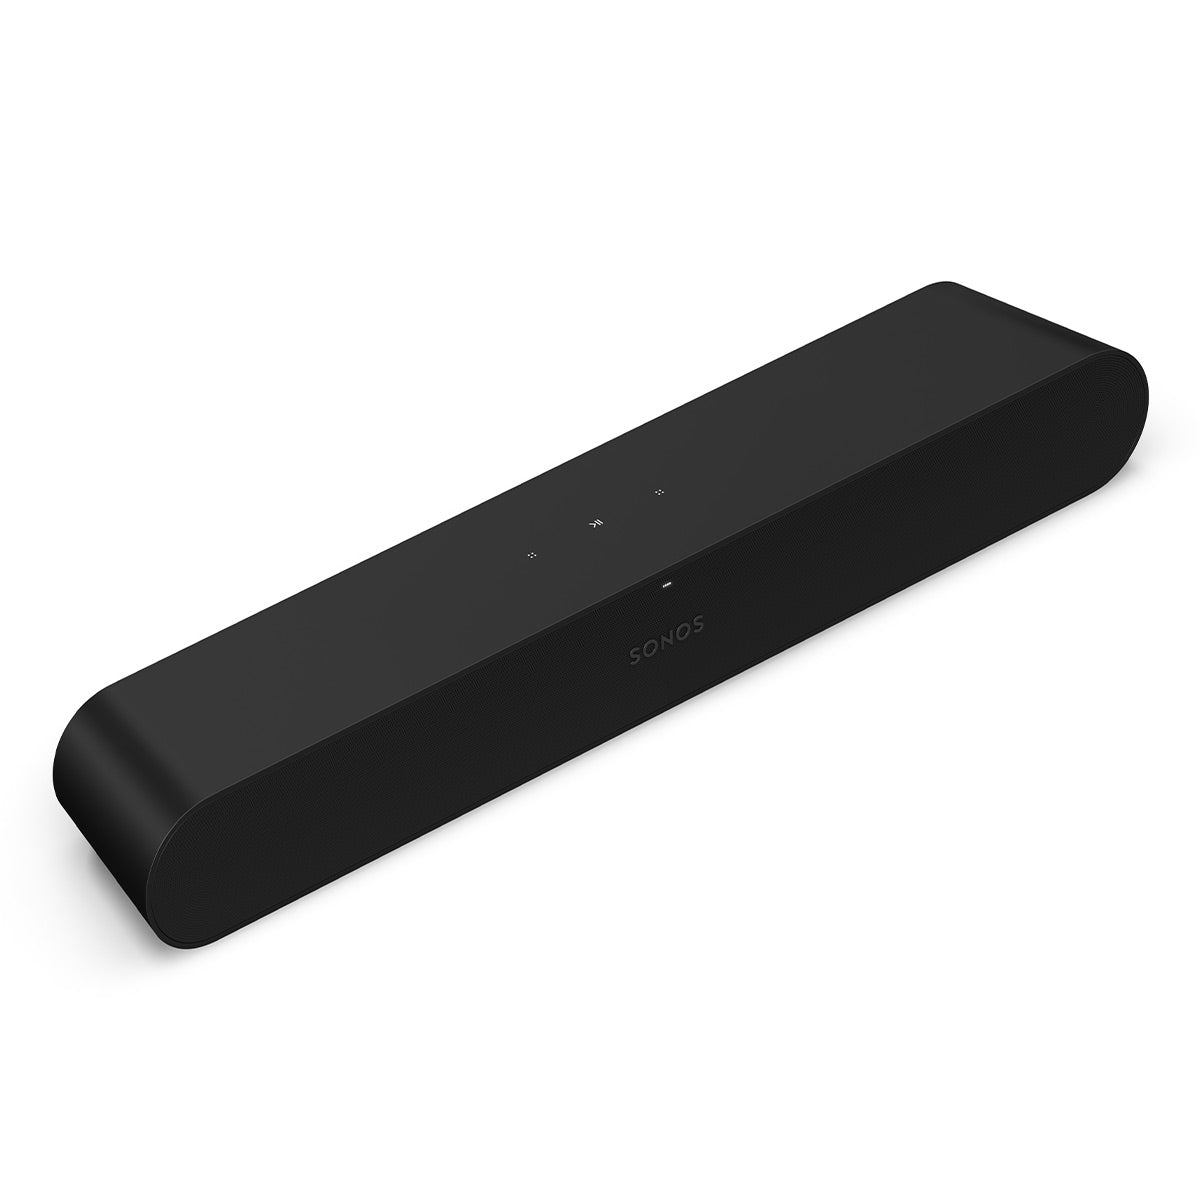 Sonos Surround Set with Ray Compact Soundbar (Black) and Pair of One SL Wireless Streaming Speaker (Black)